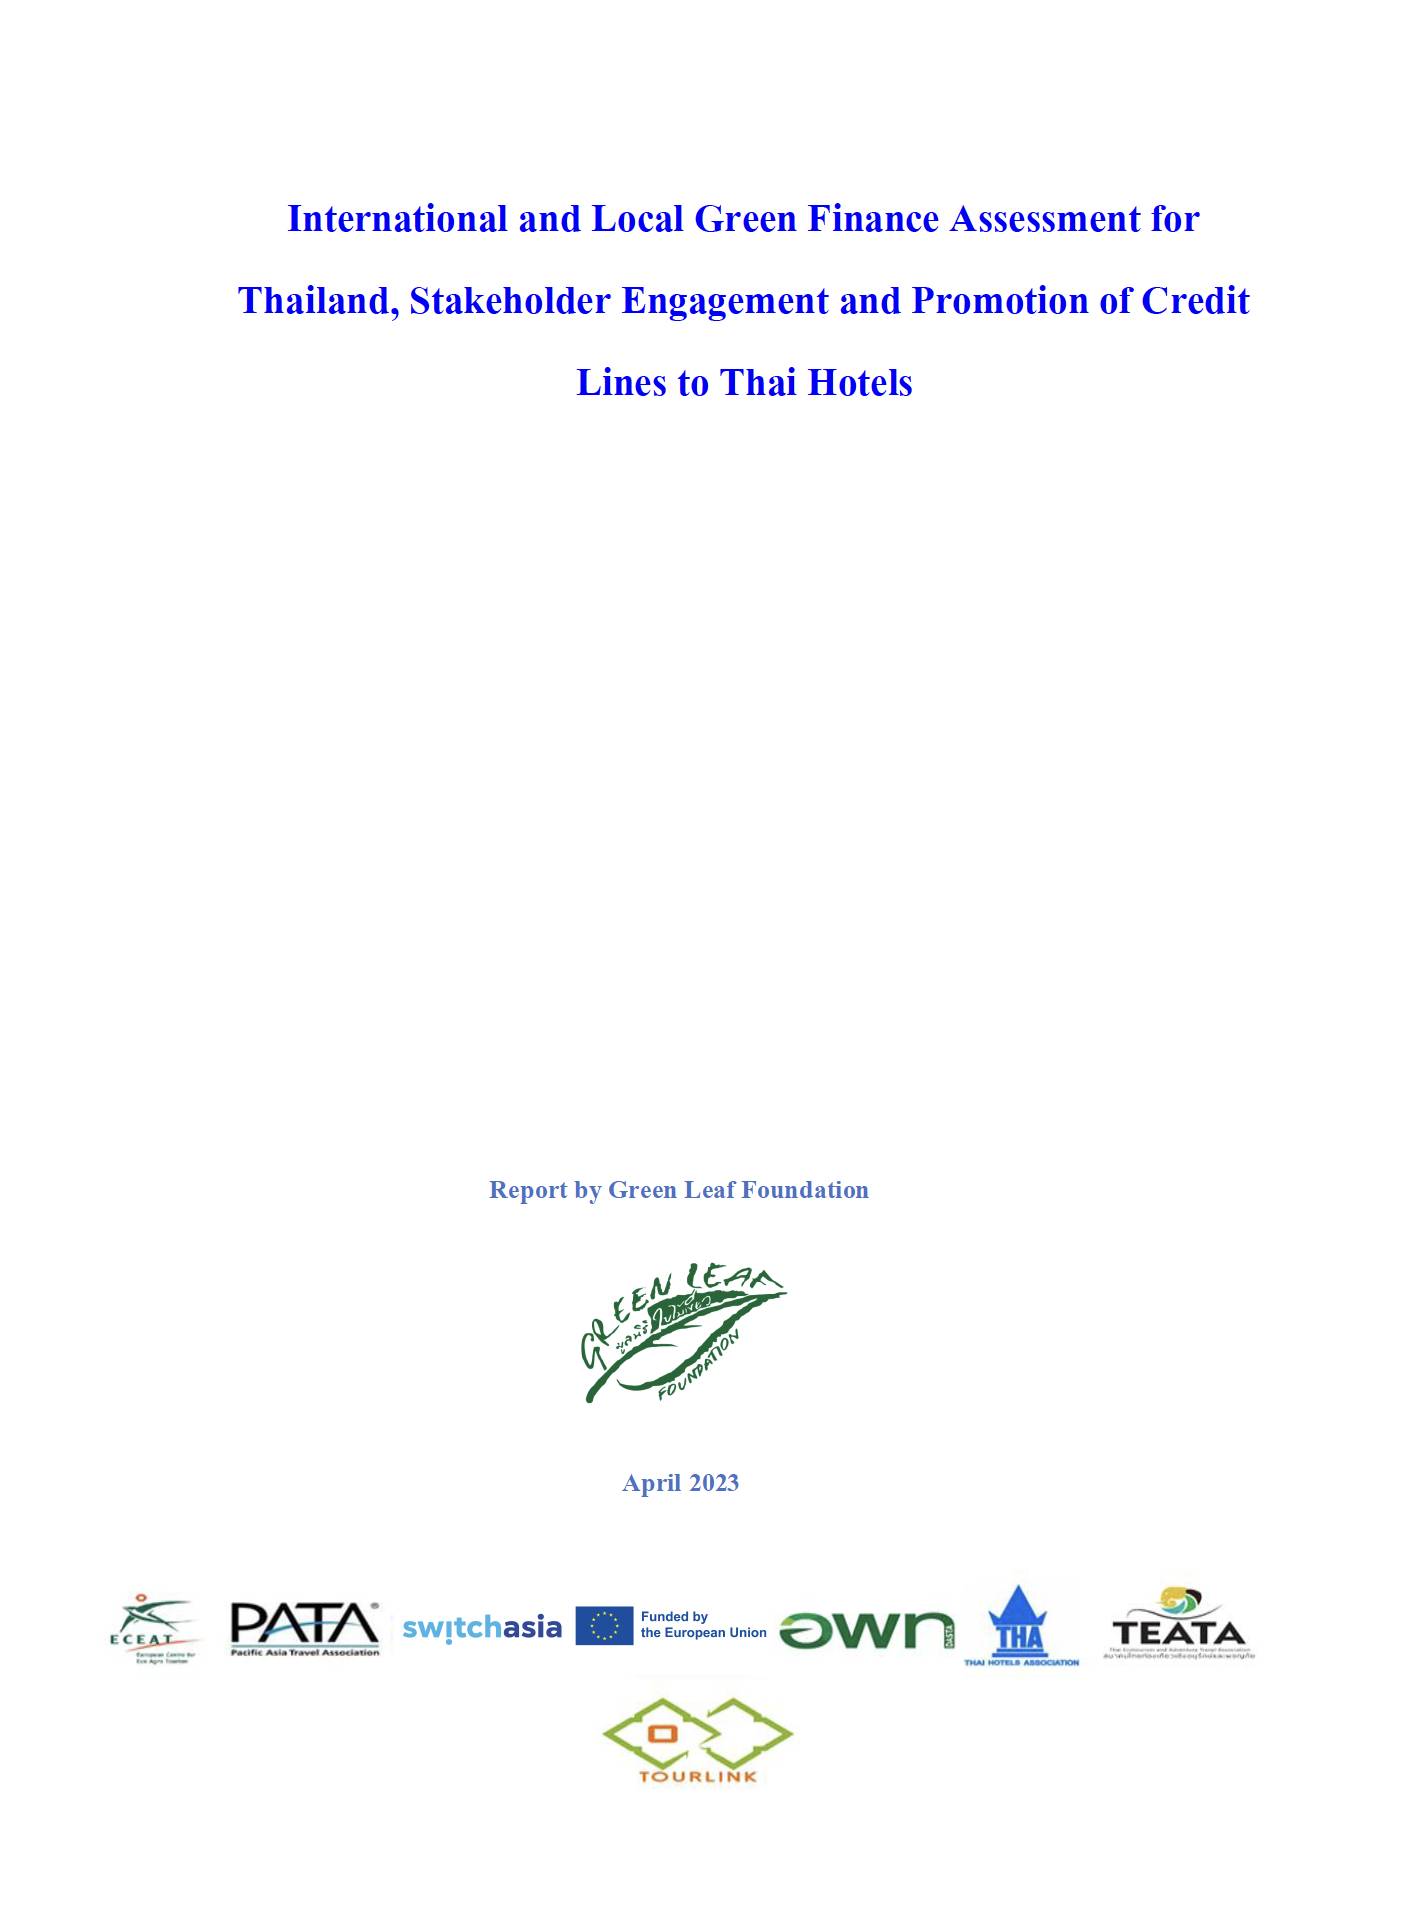 International and Local Green Finance Assessment for Thailand, Stakeholder Engagement and Promotion ...